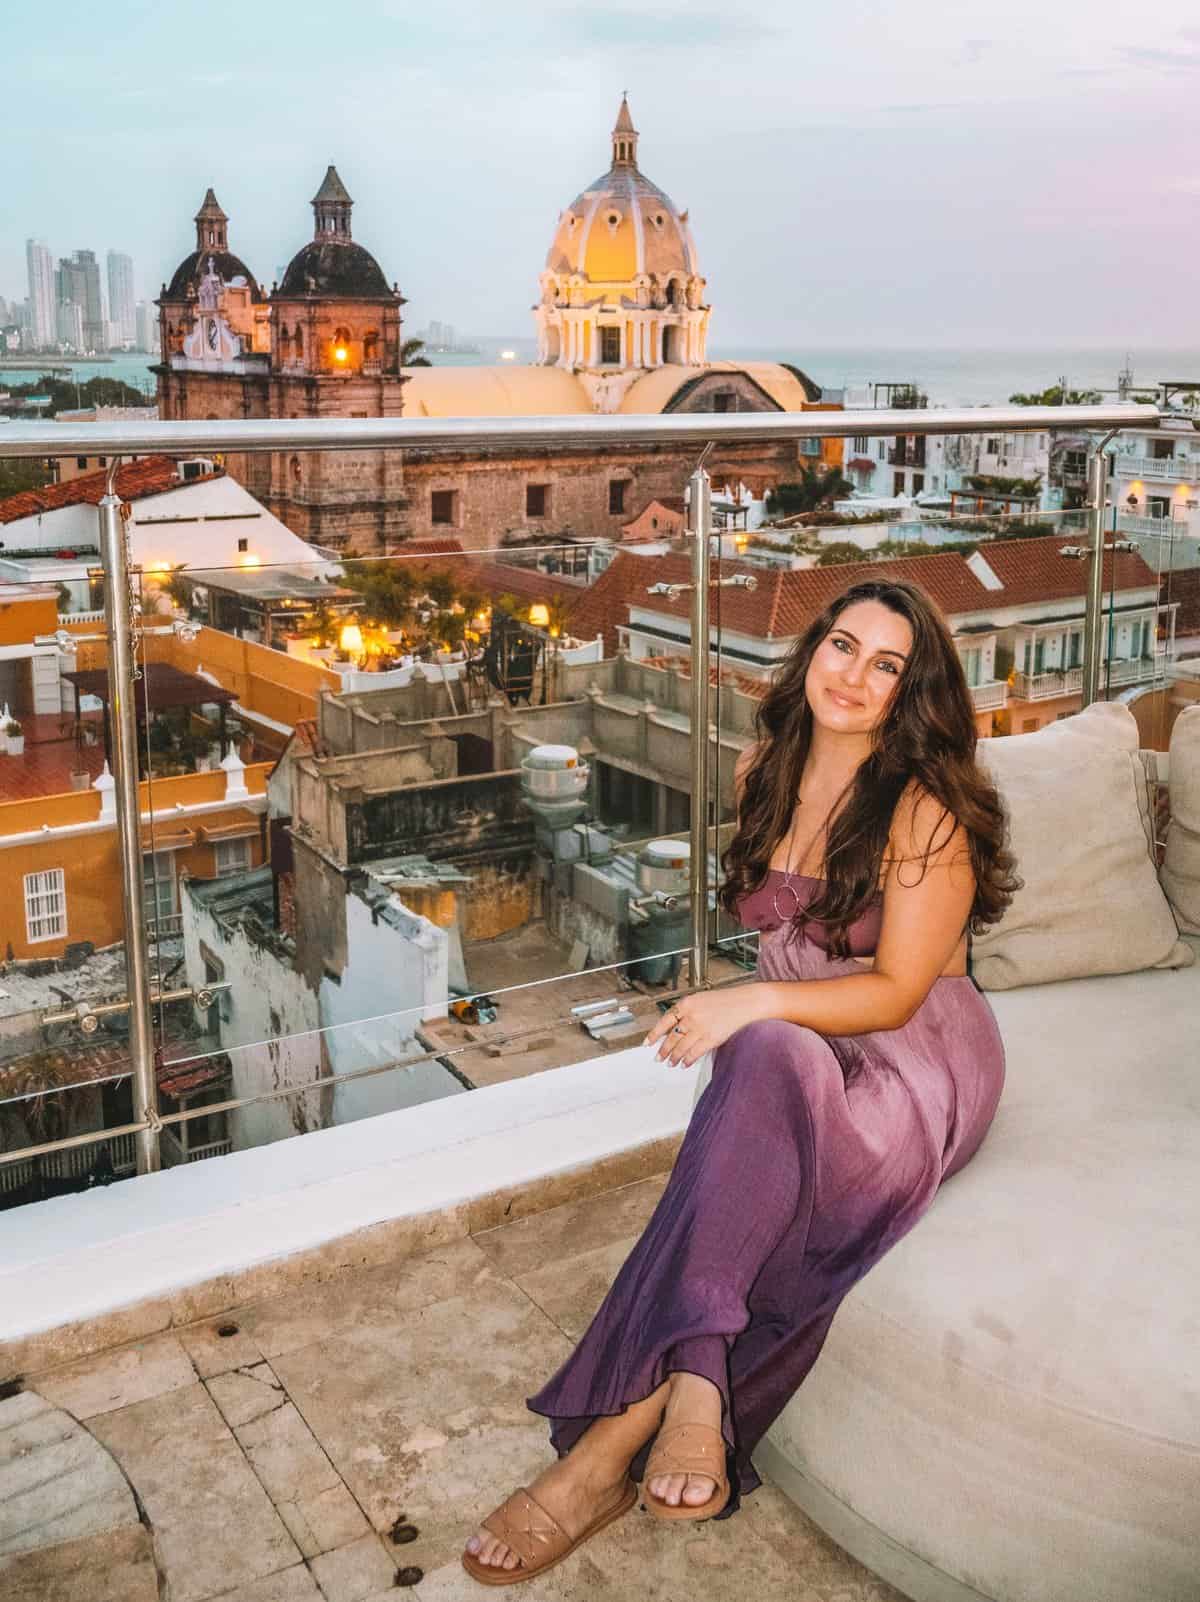 Me smiling at the Movich Hotel Rooftop Bar with gorgeous views of Cartagena in the background.